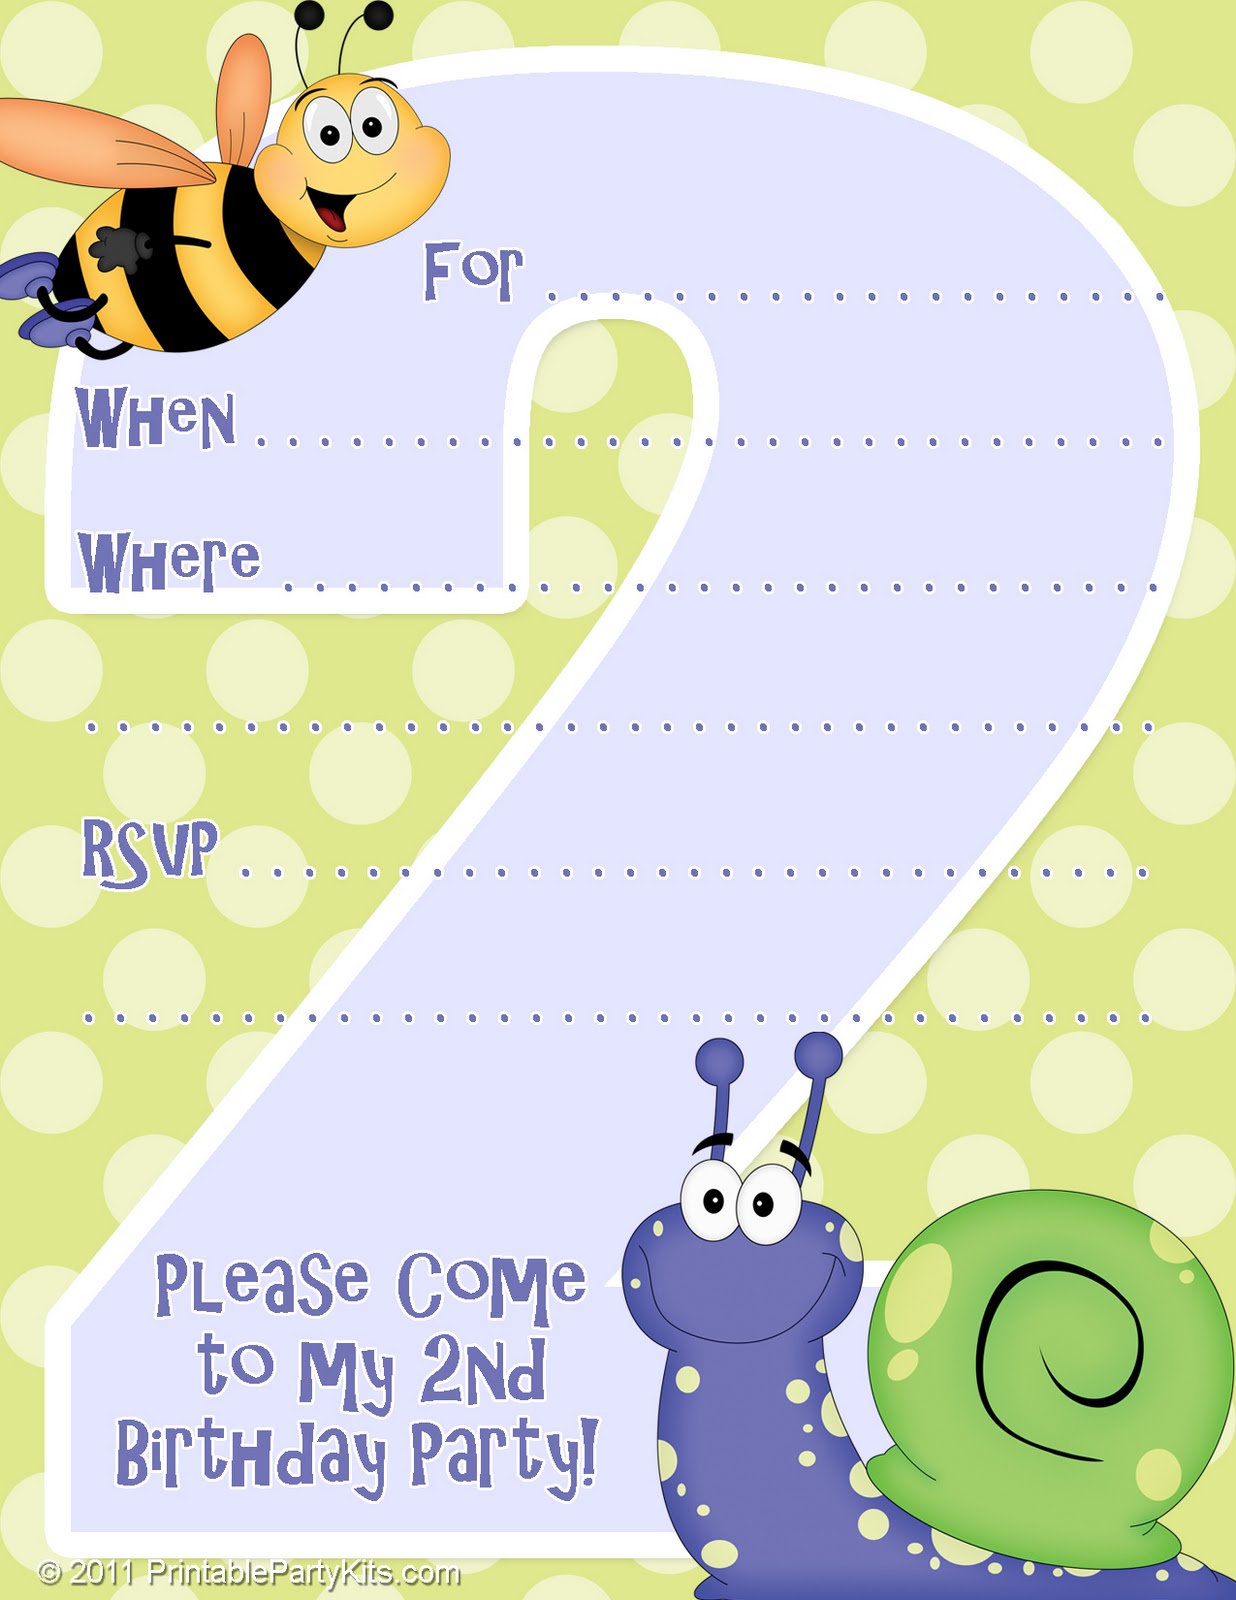 Free Printable Party Invitations Invitation Template For A 2nd 